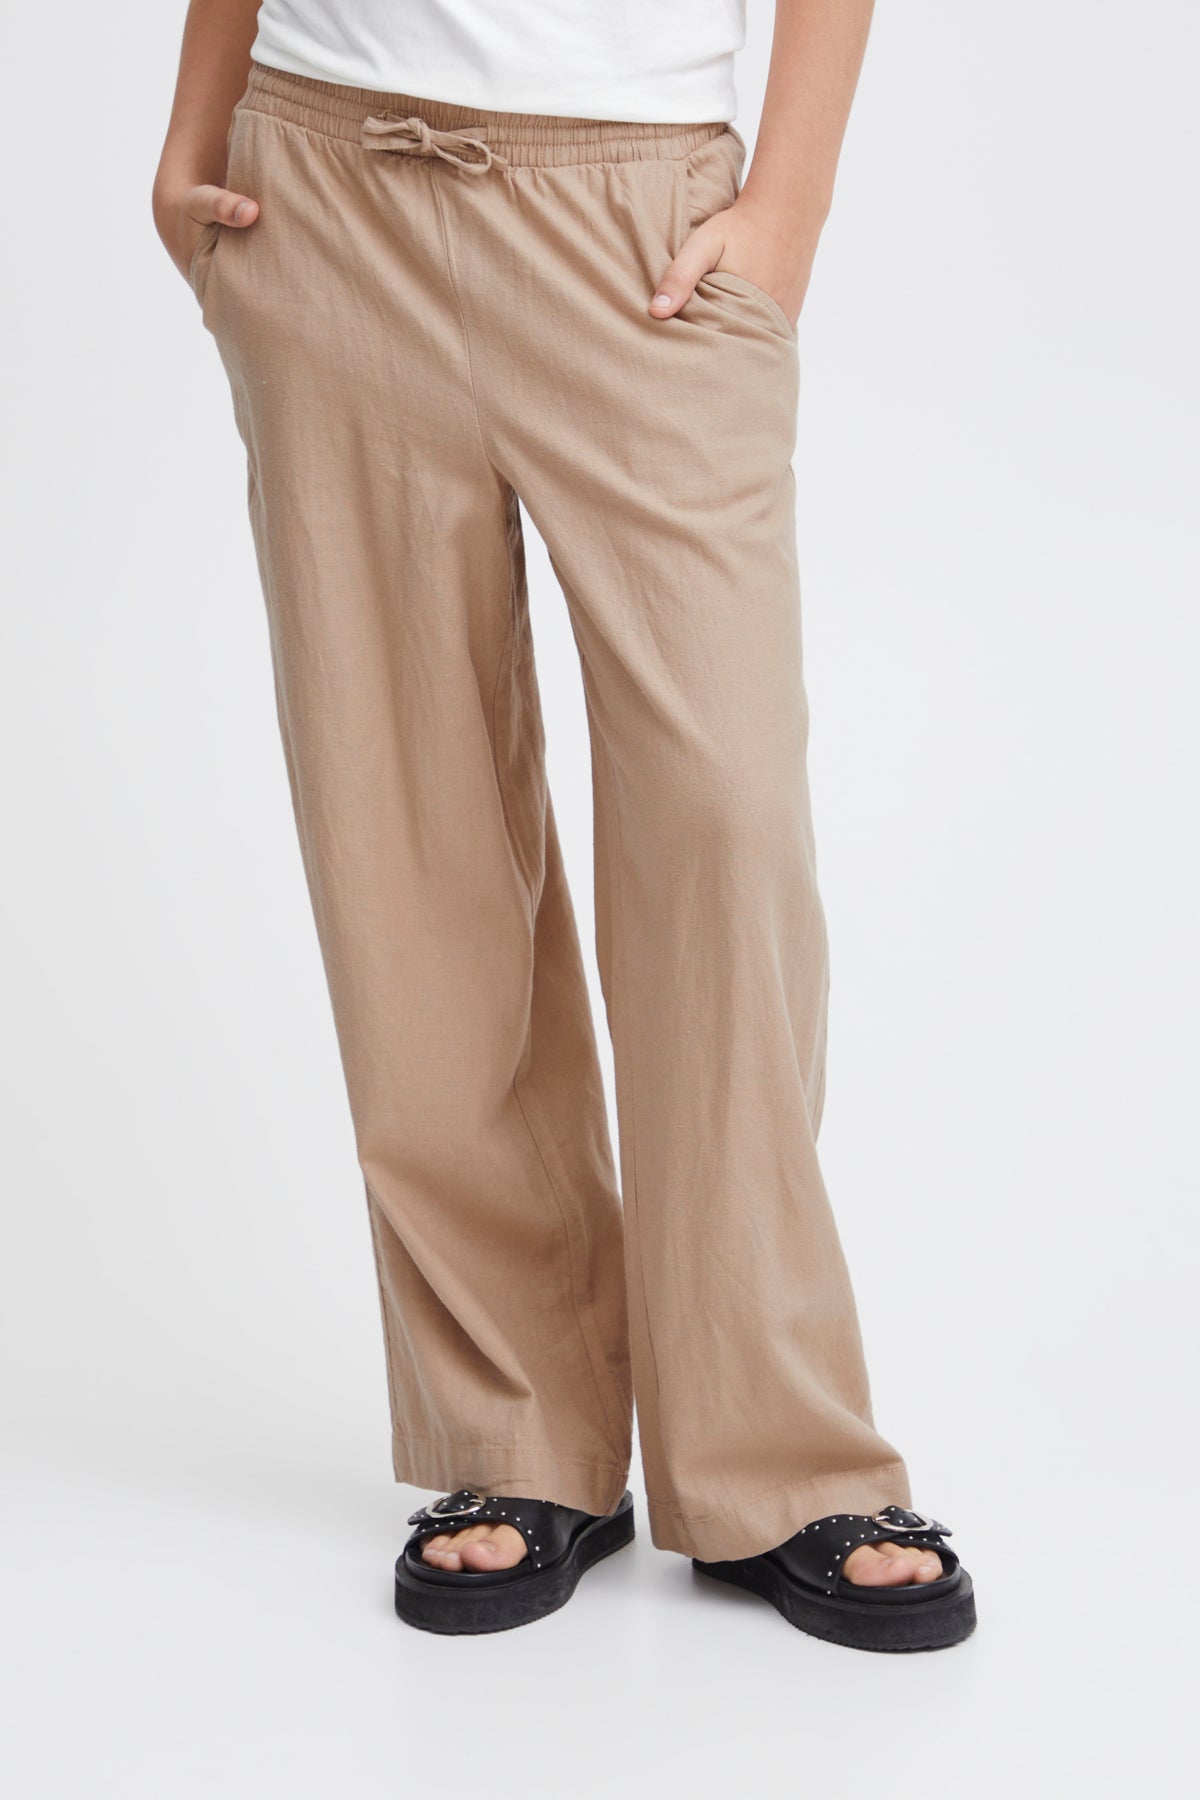 Lino Wide Leg Casual Trouser in Natural